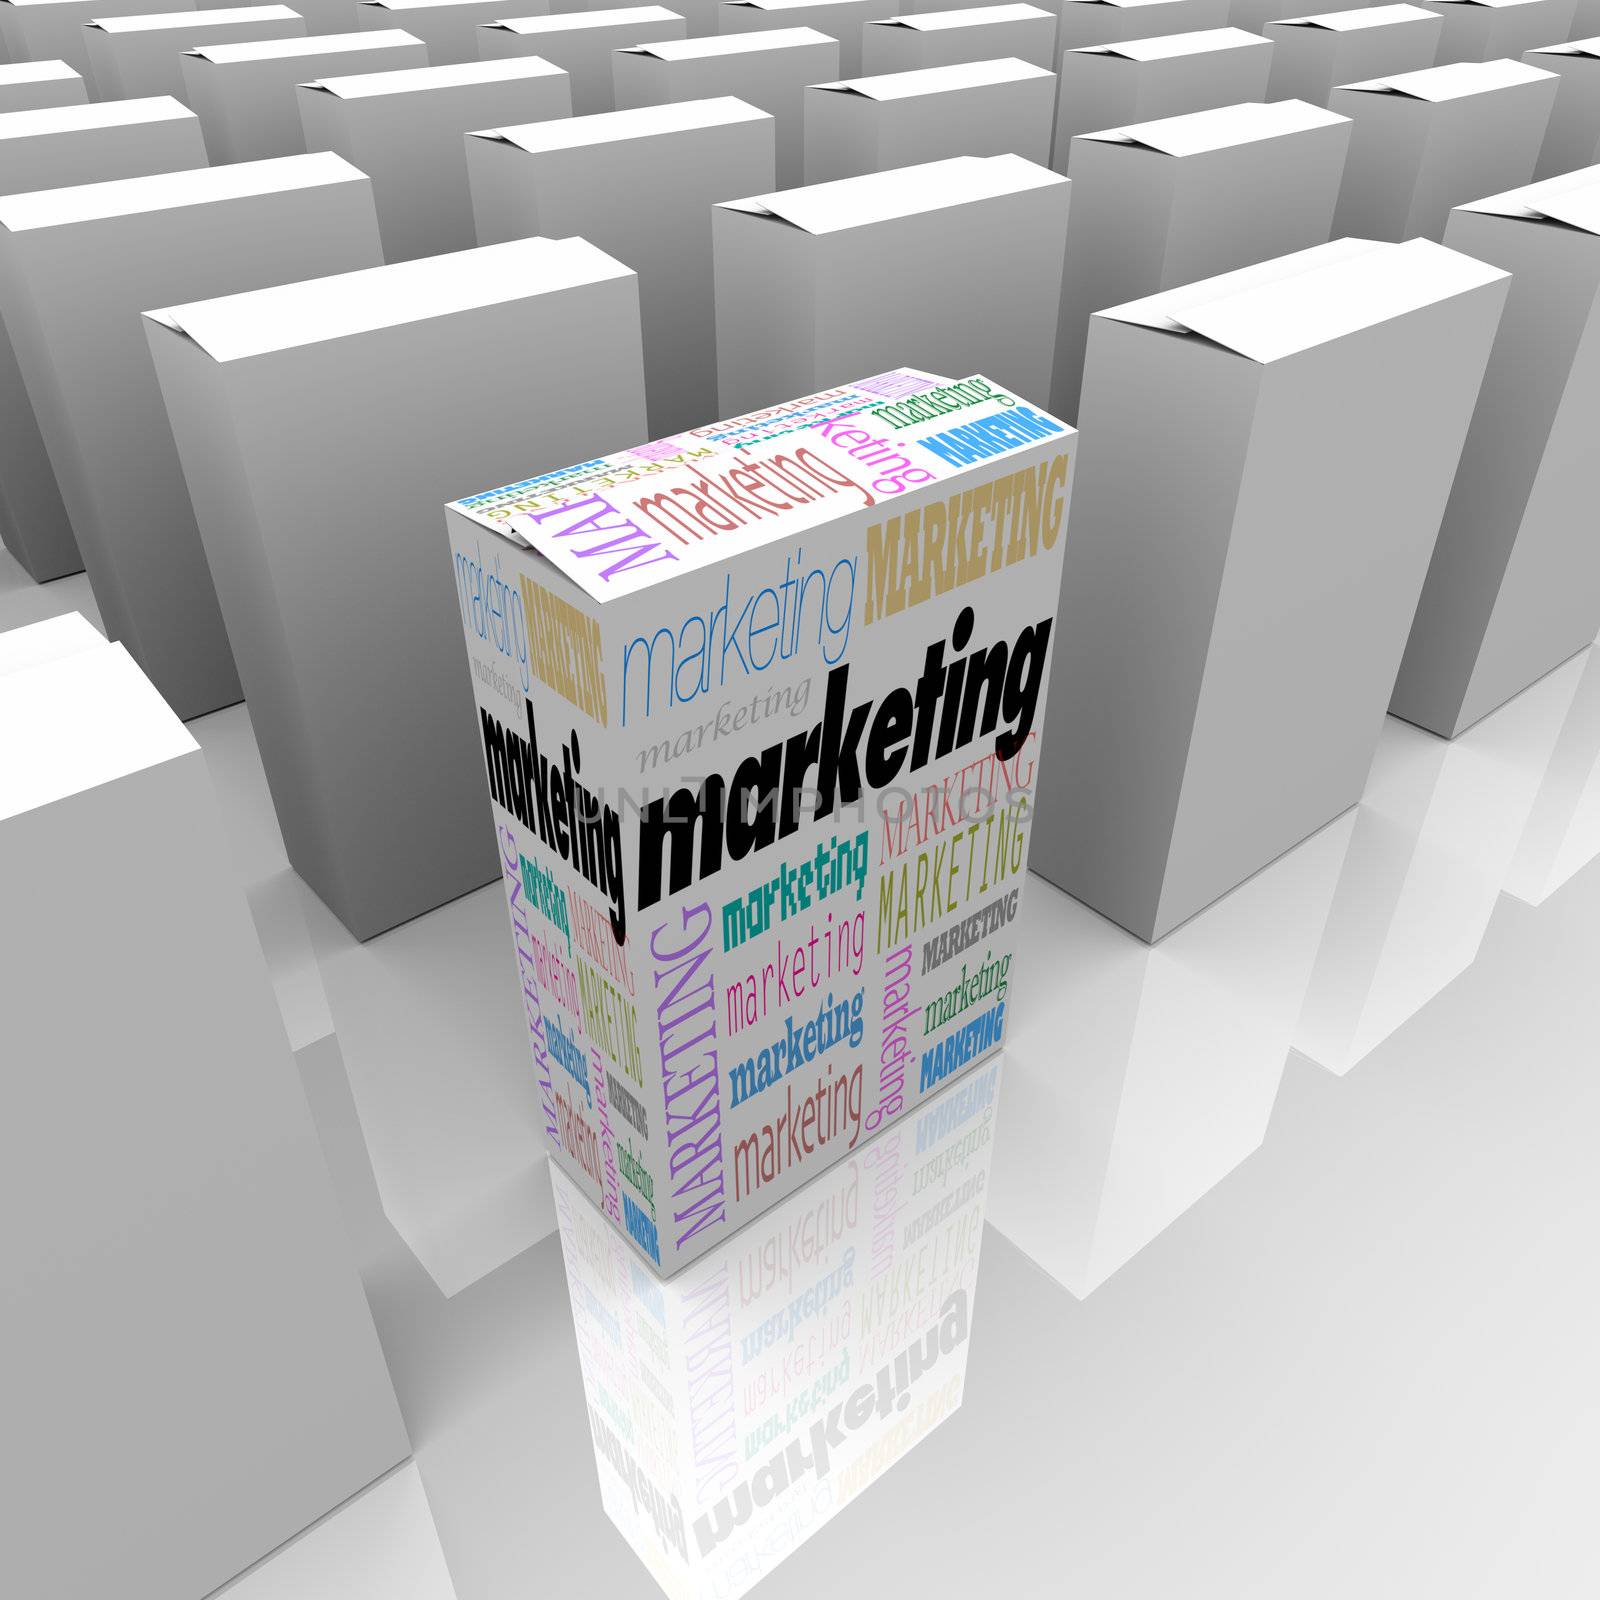  Marketing - Many Products One Different by iQoncept